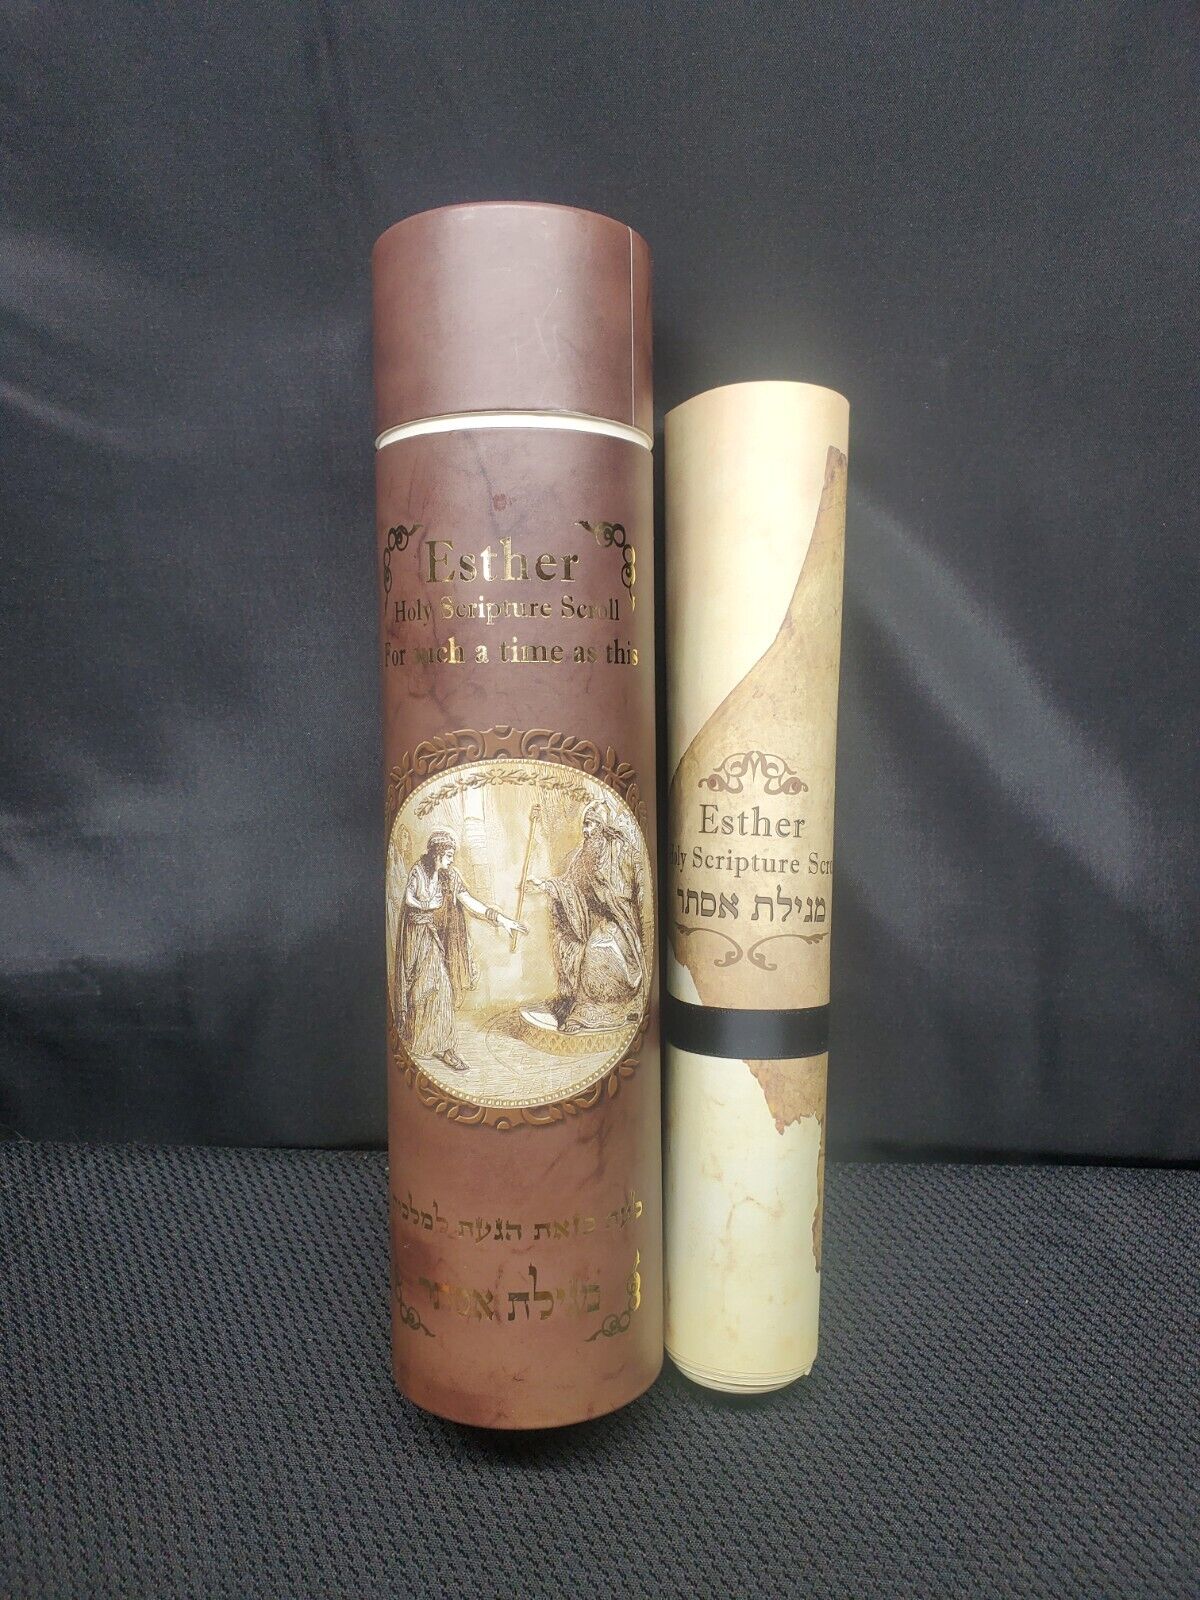 Esther Holy Scripture Scroll Illustrated Original Canister In English and Hebrew